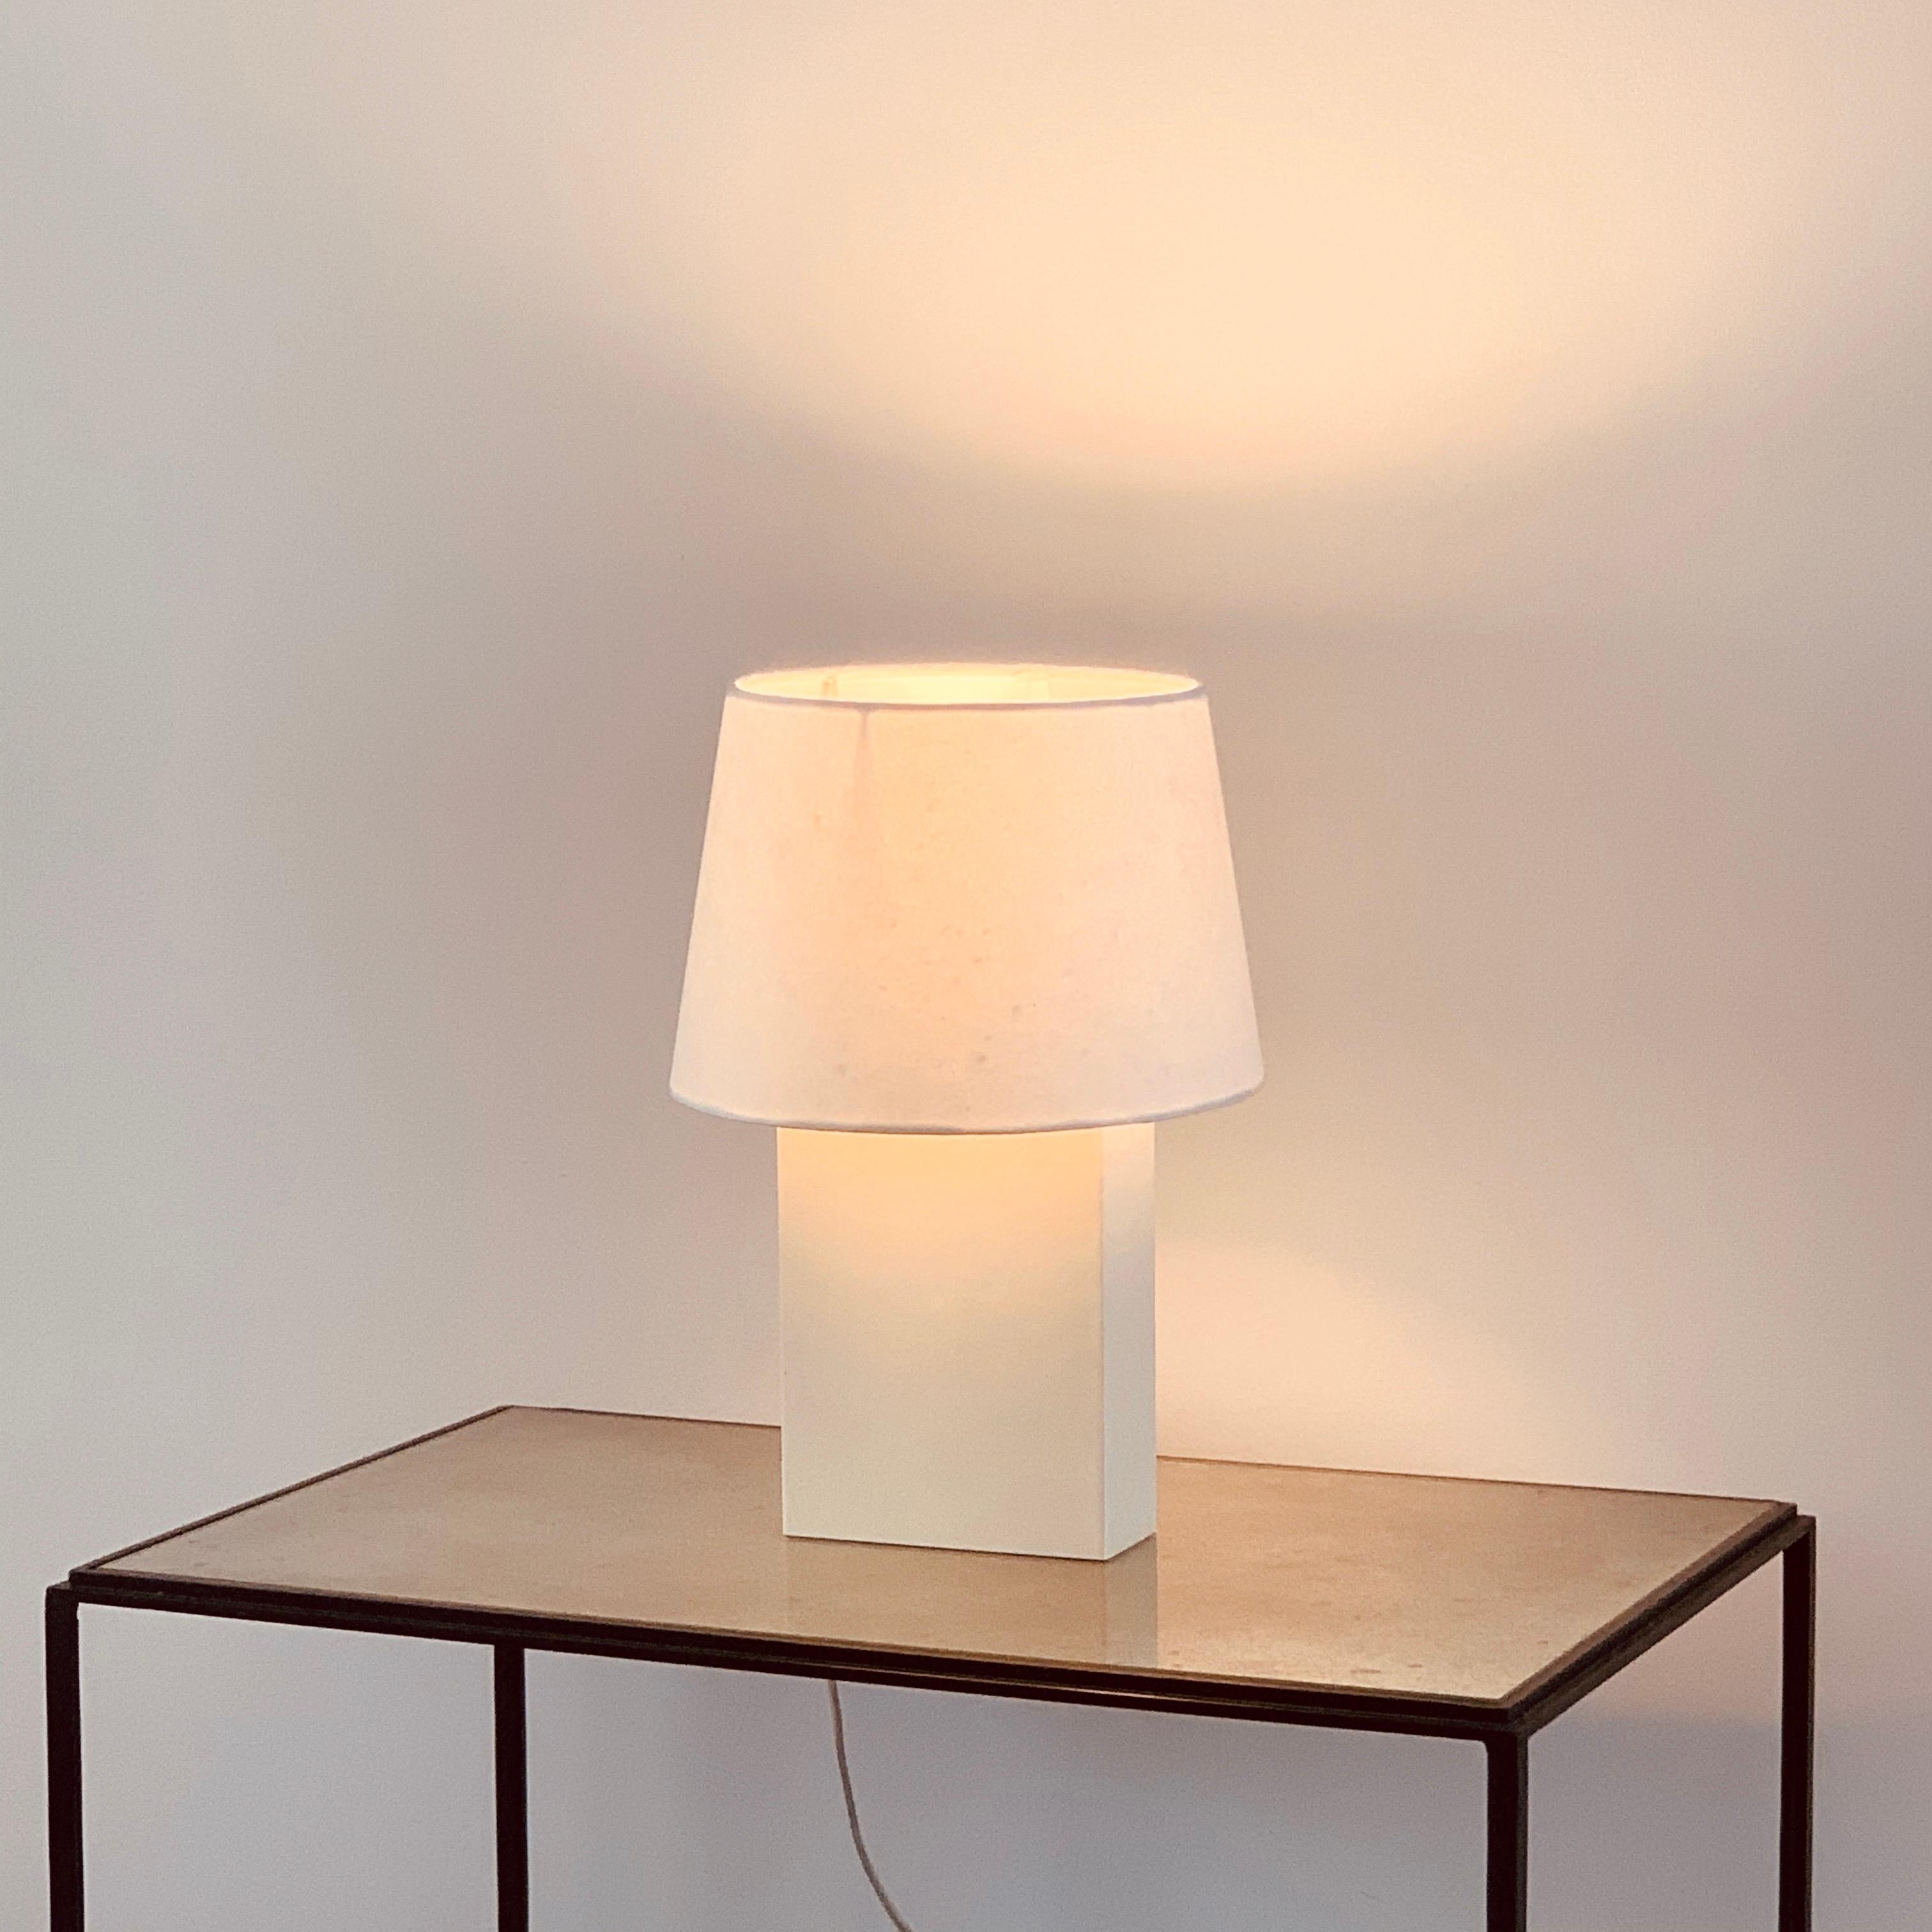 Chic 'Bloc' Parchment Lamp with Parchment Paper Shade by Design Frères In New Condition For Sale In Los Angeles, CA